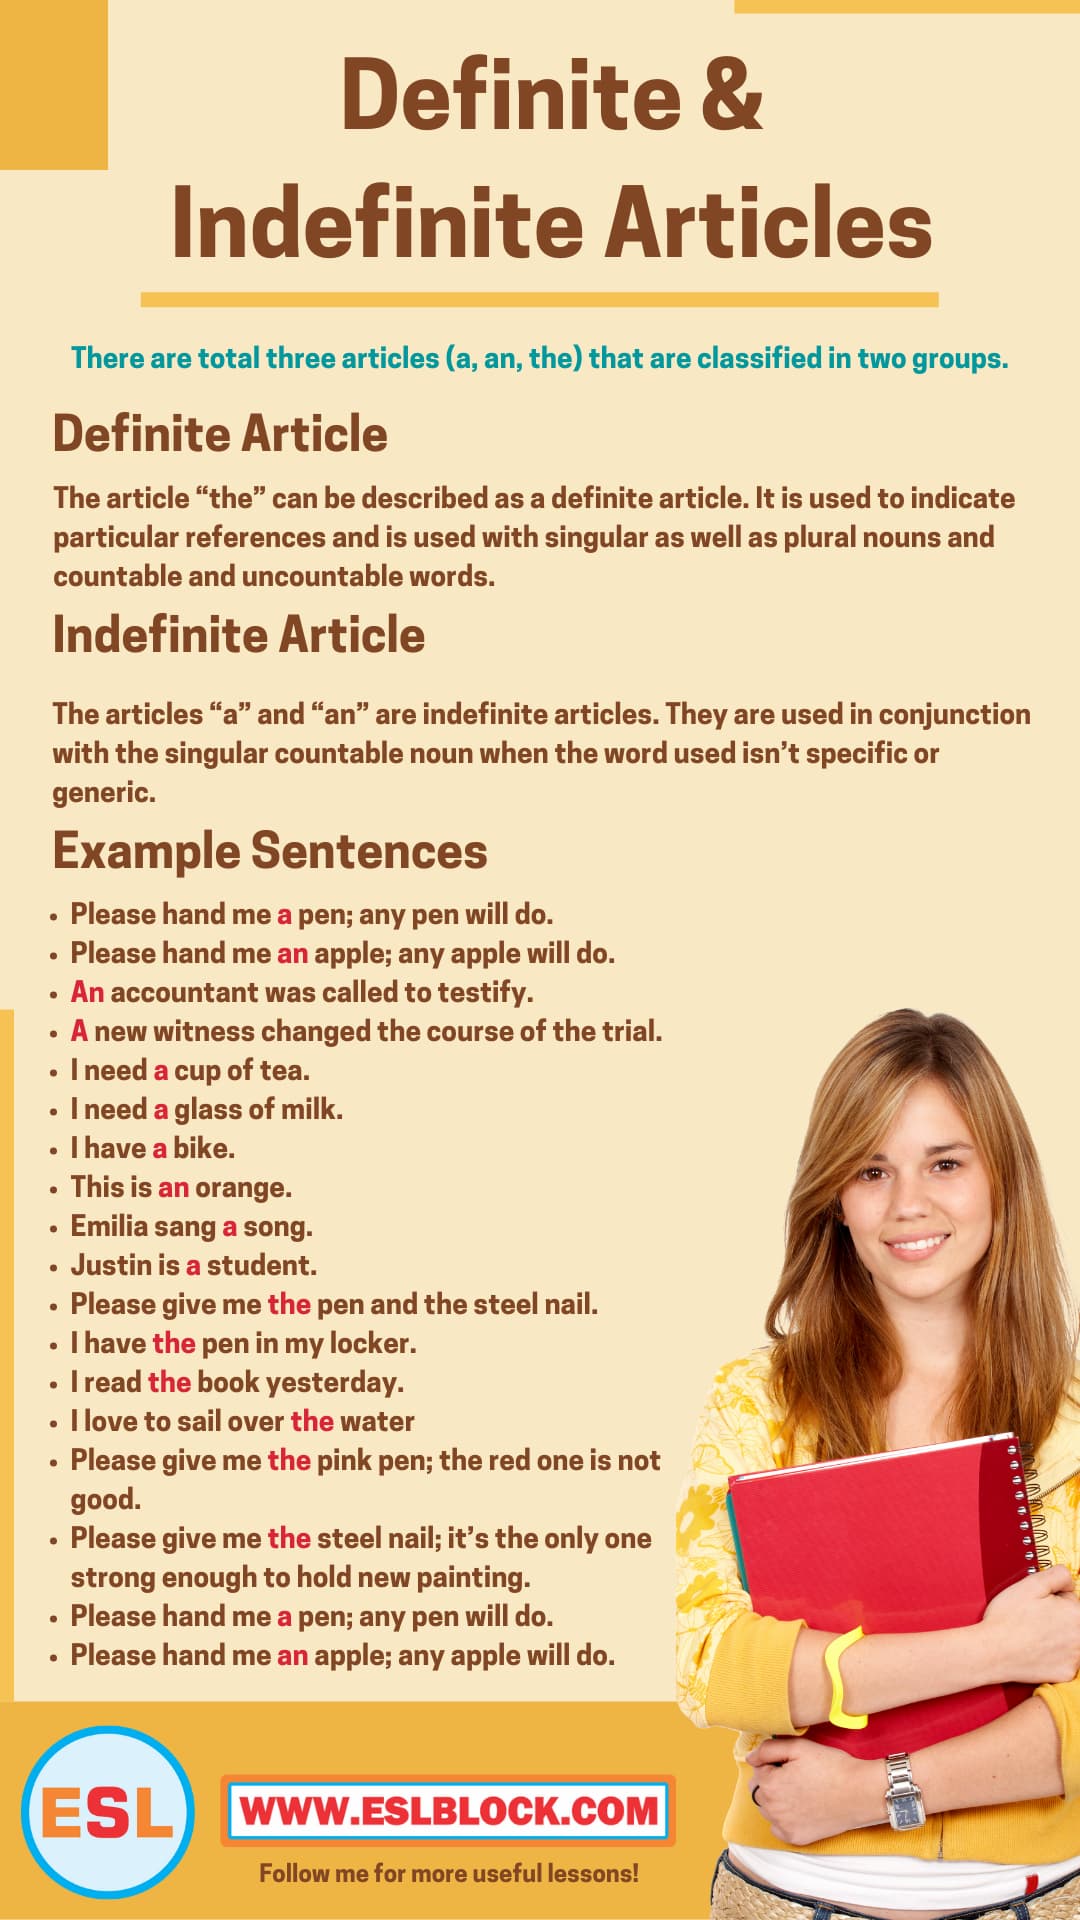 Article Before an Adjective, Articles, Choosing A or An, Definite and Indefinite Articles, Definite Article, Indefinite Article, Indefinite Articles with Uncountable Nouns, Omission of Articles, Rules of Using Articles with Examples, Types of Articles, Using Articles with Pronouns, What are Articles, What are Definite and Indefinite Articles, What are Definite and Indefinite Articles in English Grammar